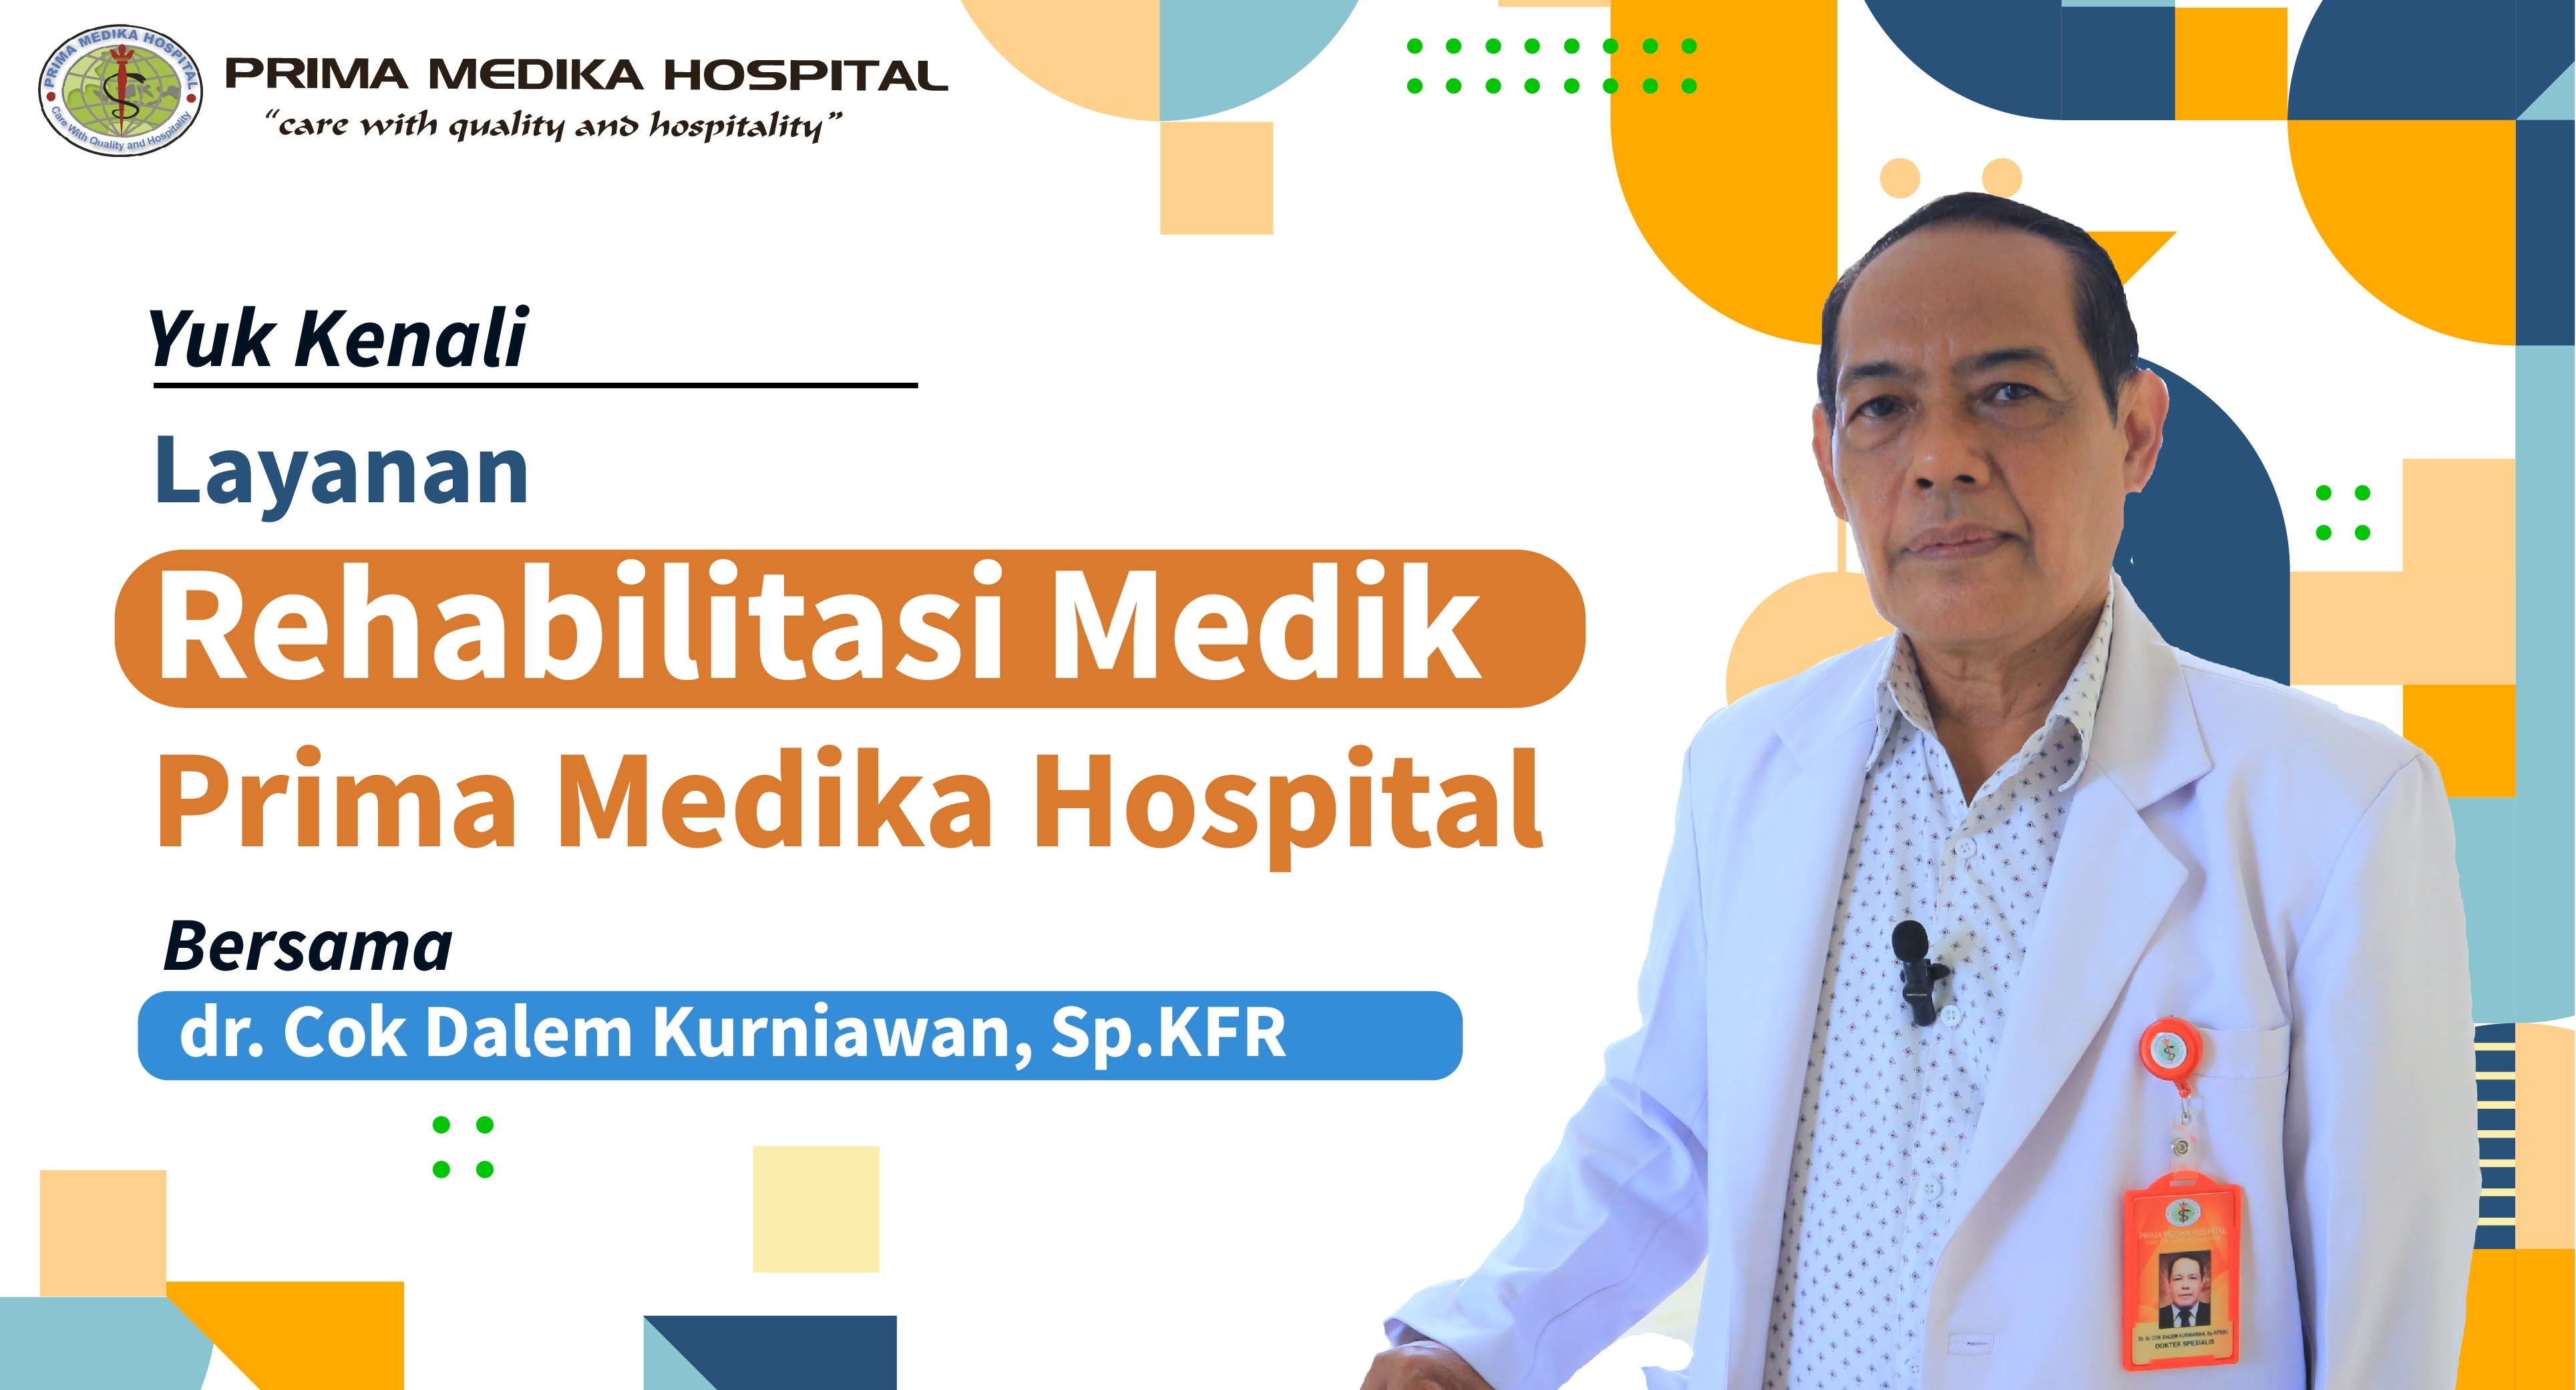 Let's get to know more closely how Prima Medika Hospital's Medical Rehabilitation Services